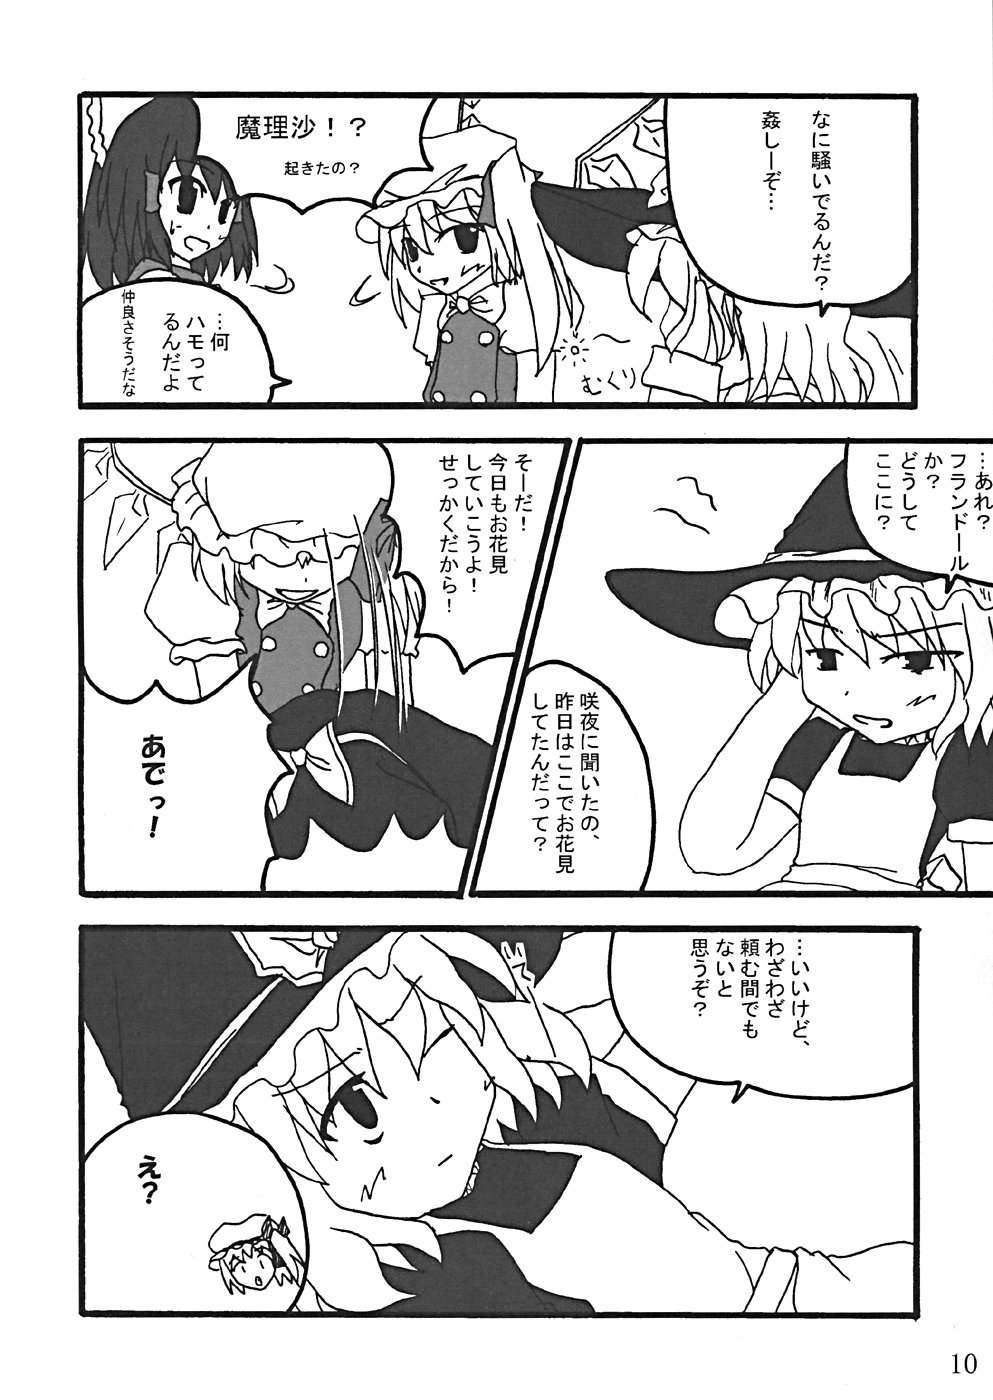 (CR35) [LemonMaiden (Various)] Oukasai ～ Cherry Point MAX (Touhou Project) page 13 full